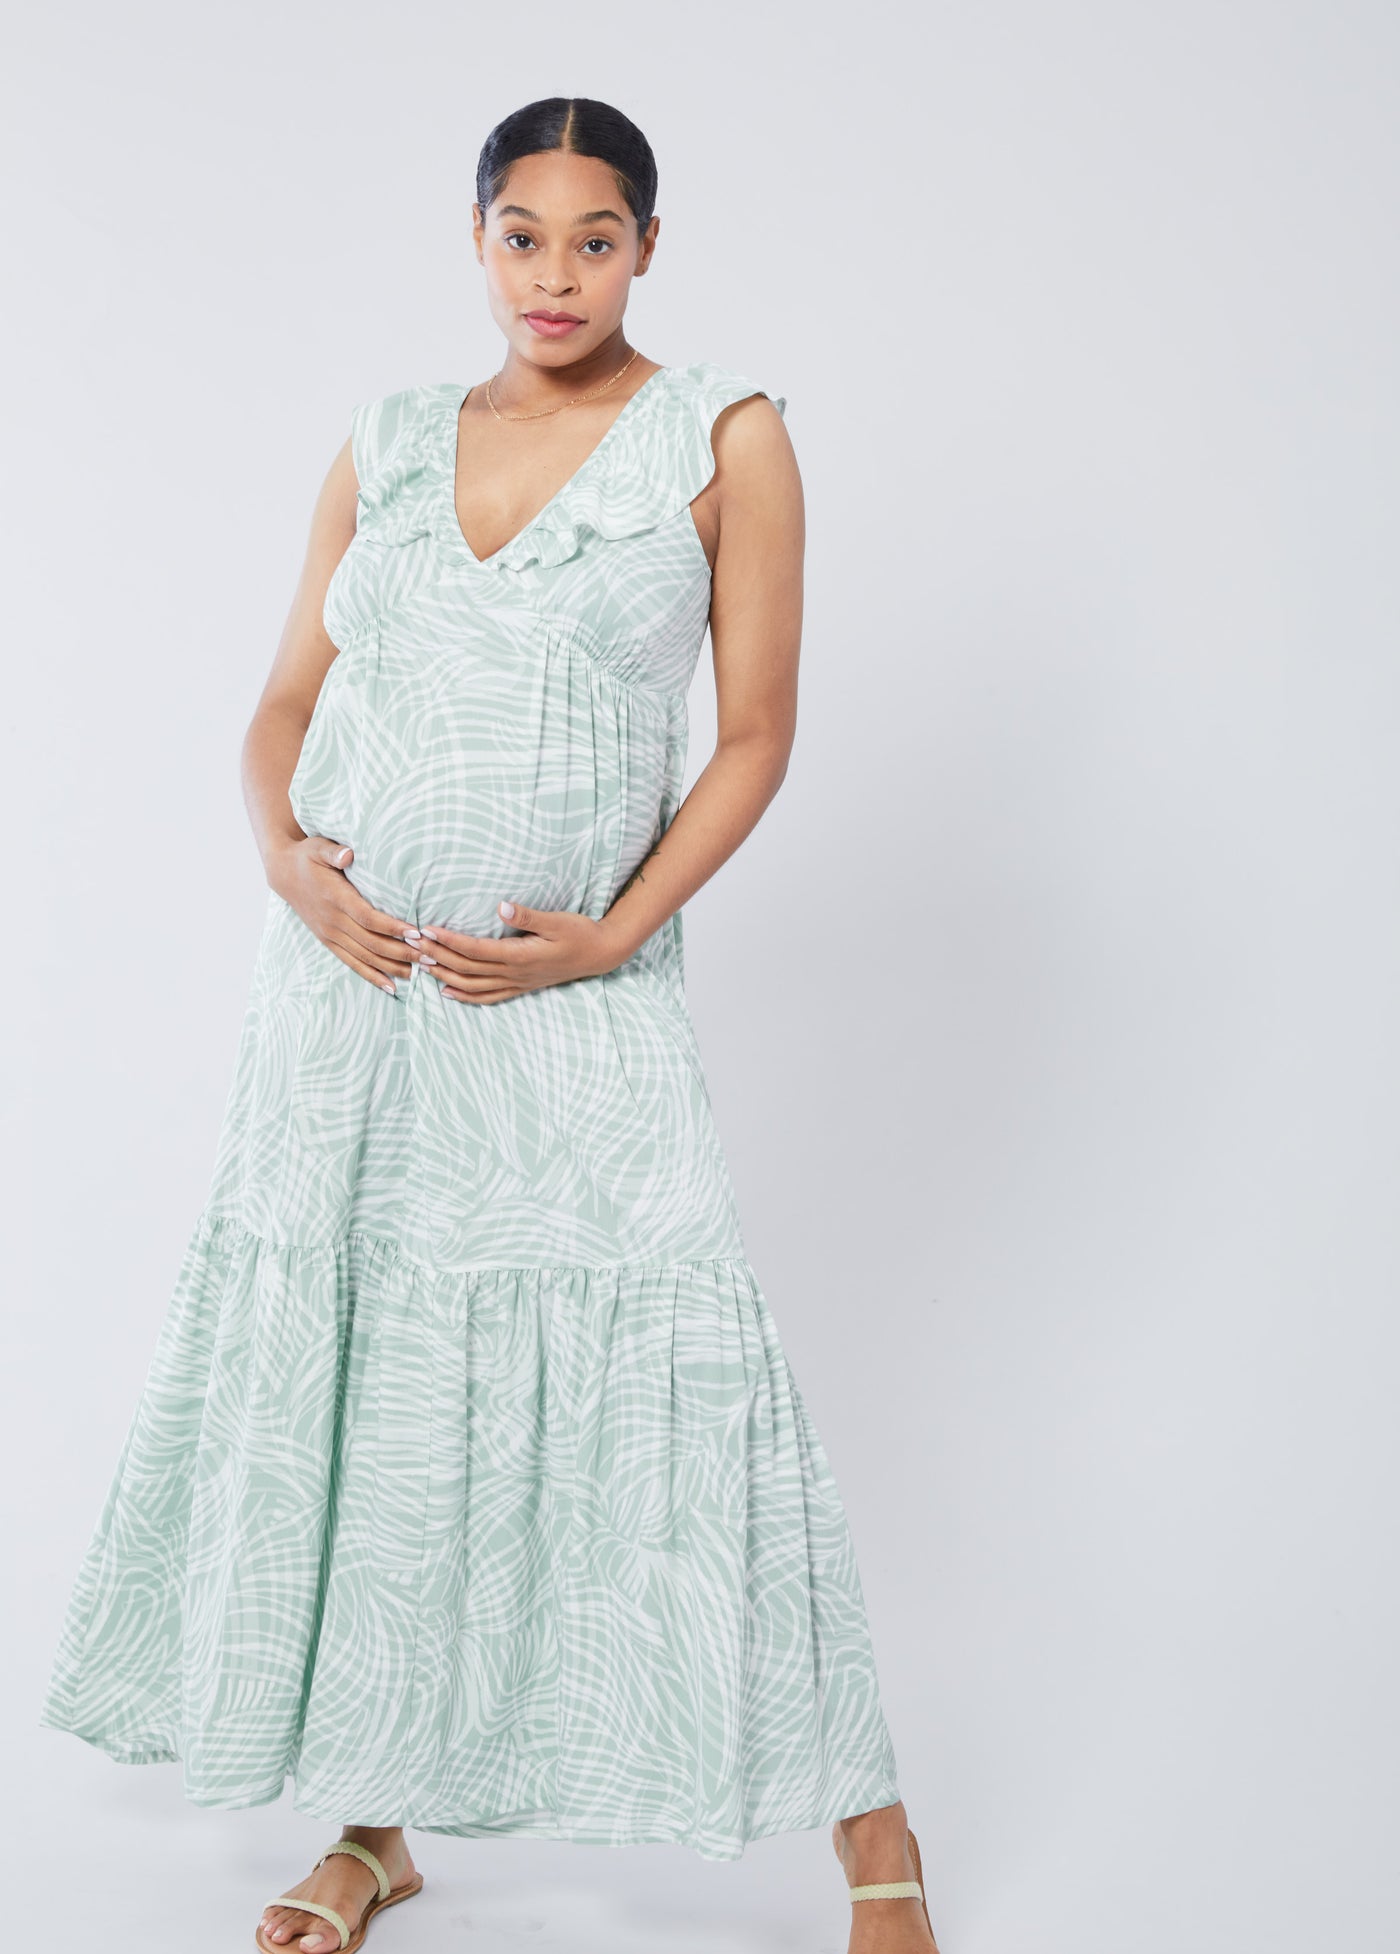 Jasmine is 5’7”, 8 months pregnant, and wearing size small||Whimsical Wave Sage